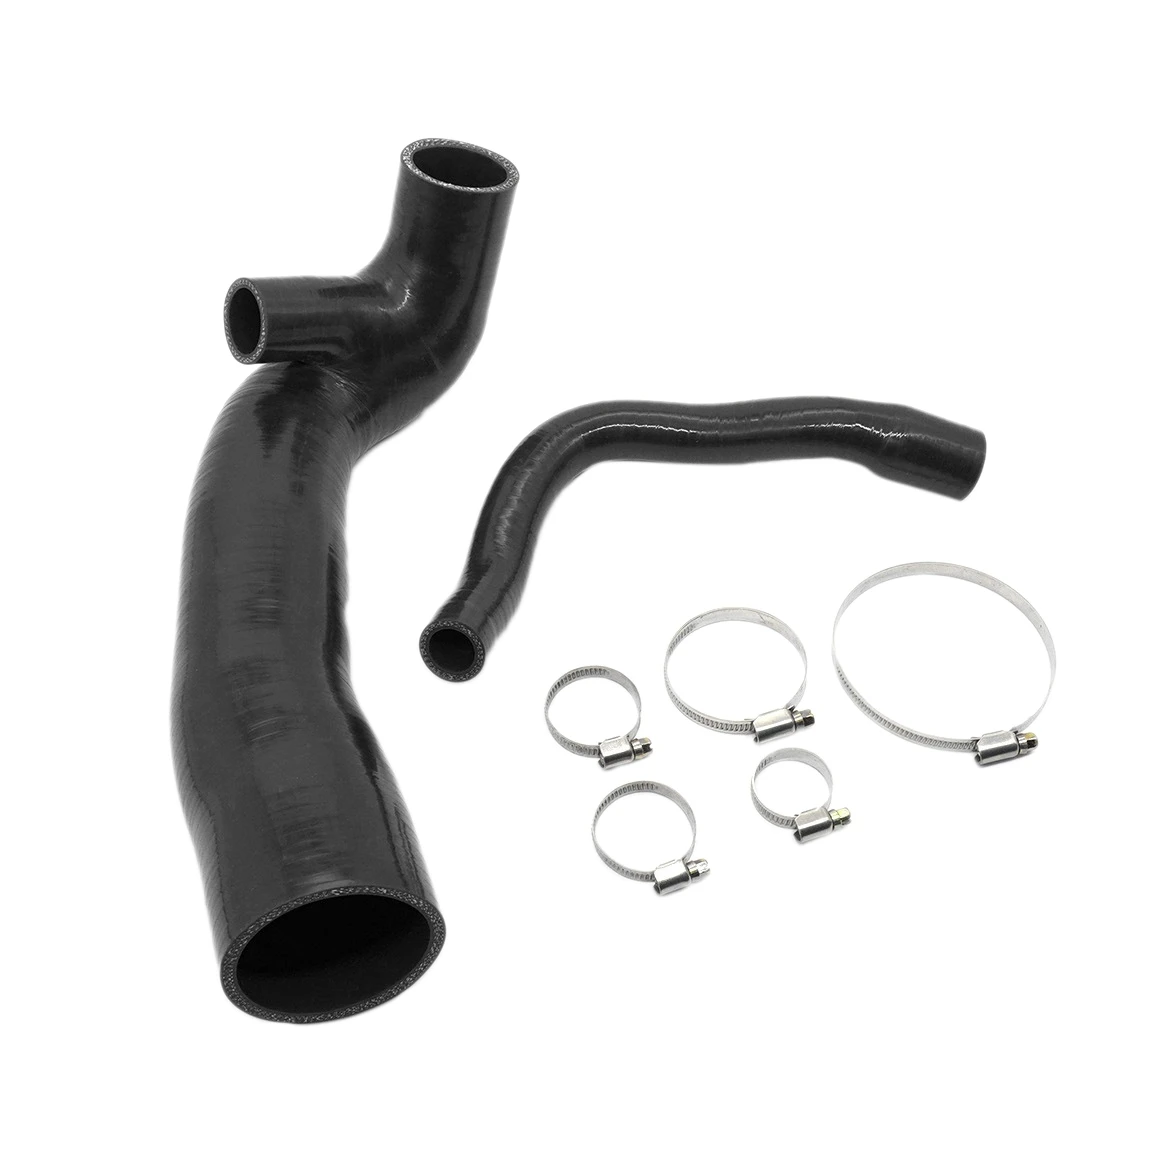 

Black Silicone Air Intake Hose Turbo Inlet Pipe Kit for Mini Cooper S Clubman 1.6T R55 R56 R57 N14 Engine 2007-2010